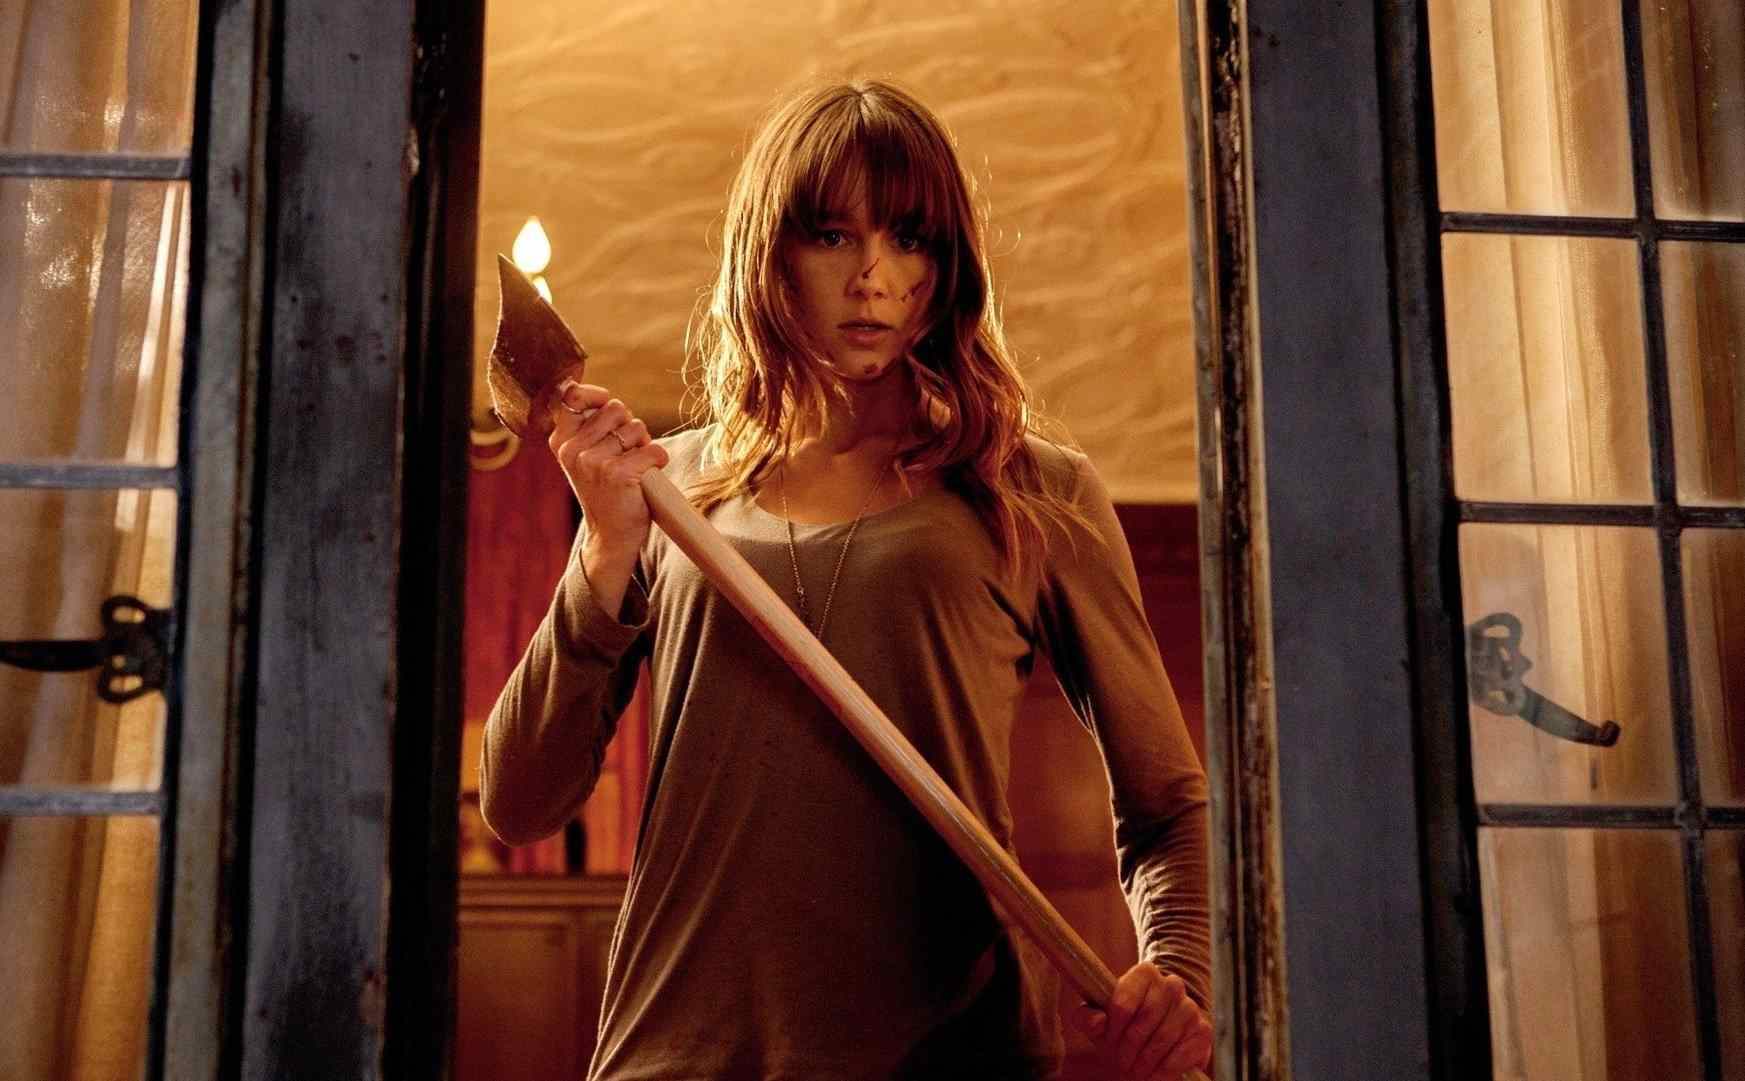 Erin holding an axe at the window in You're Next.